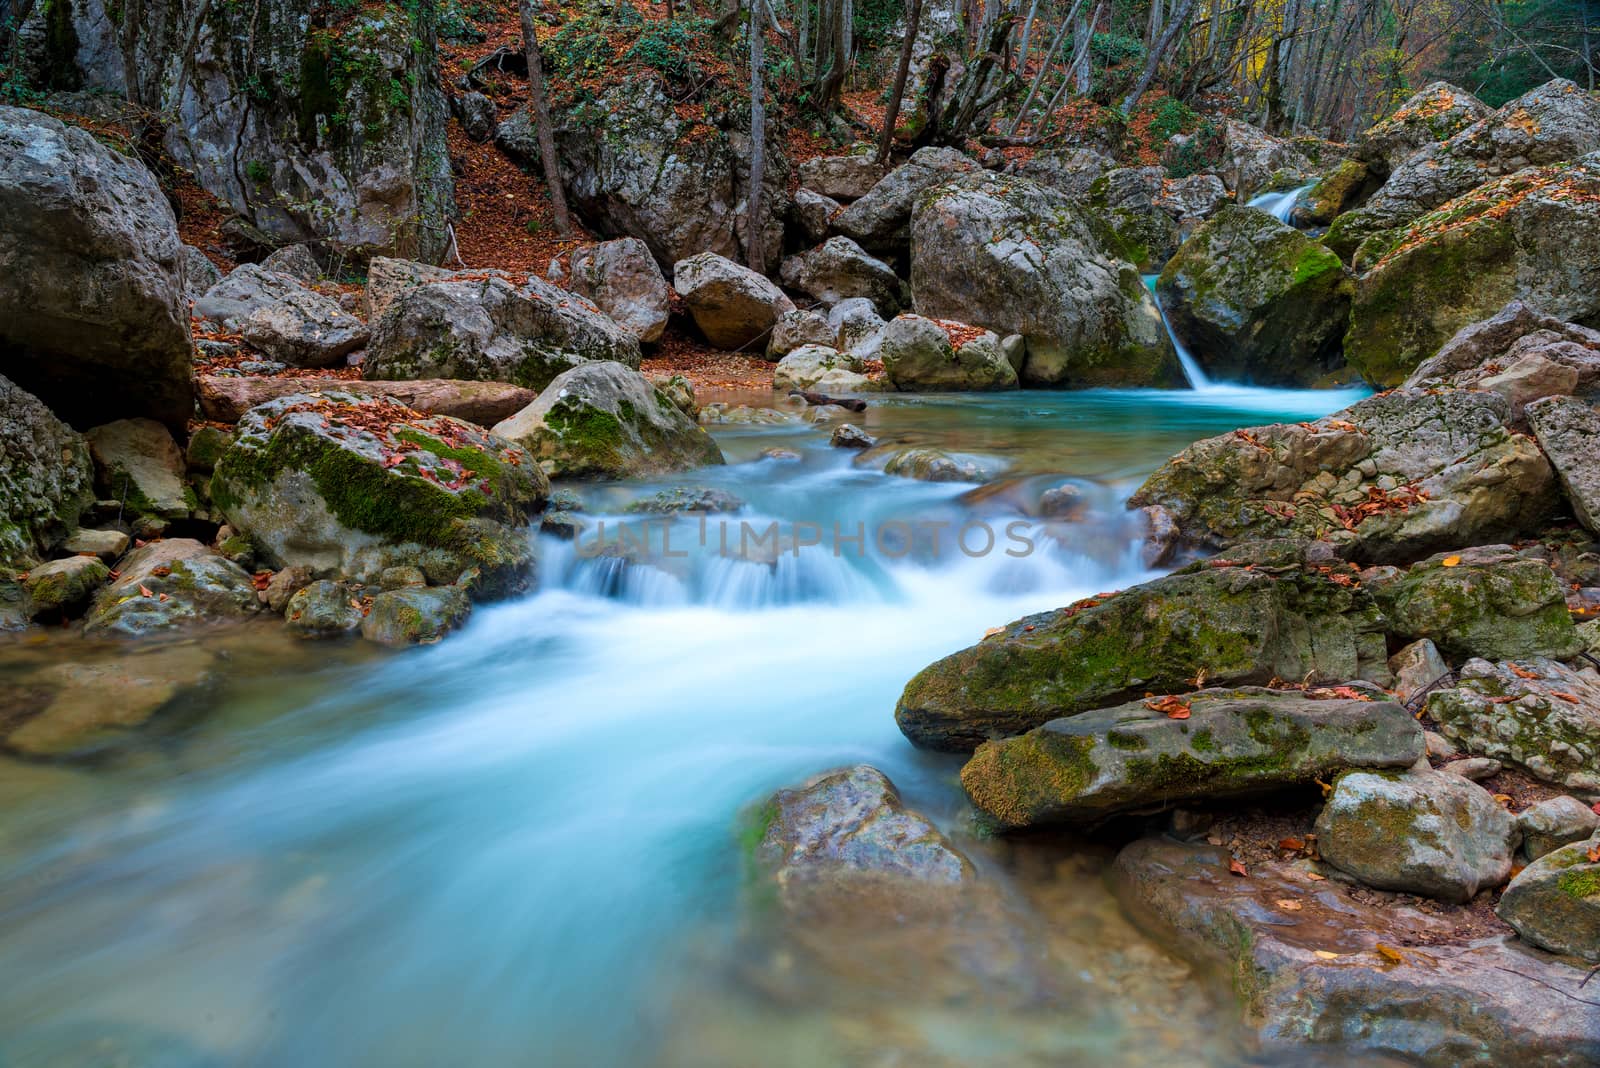 The river in the mountains, fast water among the stones, a beautiful landscape in autumn